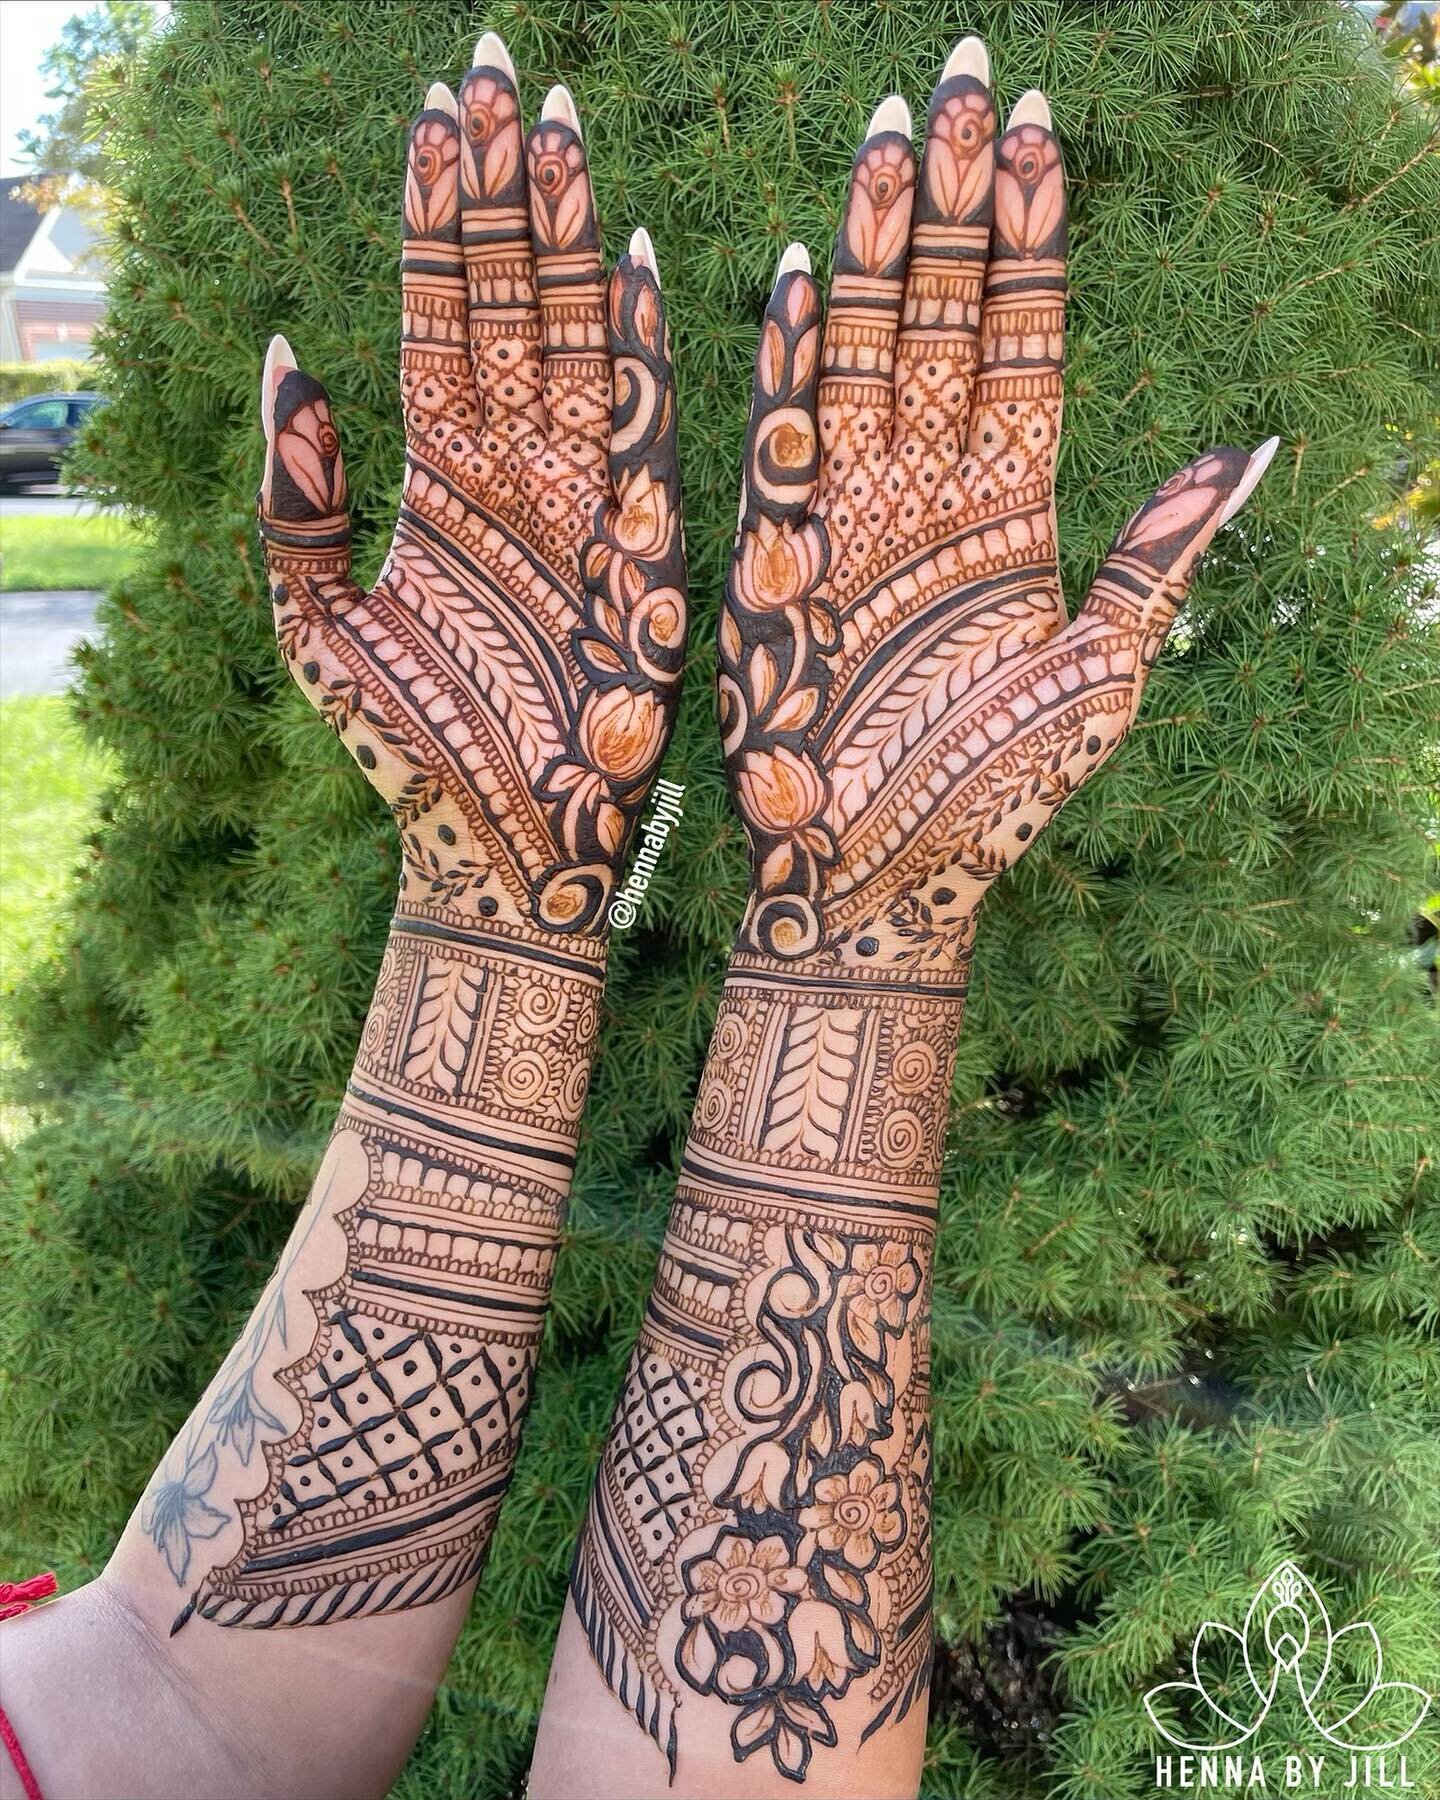 Living a revival moment with @shrut.sun henna!! This was a memorable one for more reasons than one (thanks Ida 😅) but I had such a blast hanging out with Shruti. She was such an easy going and chill bride that I almost forgot I was there to work! We